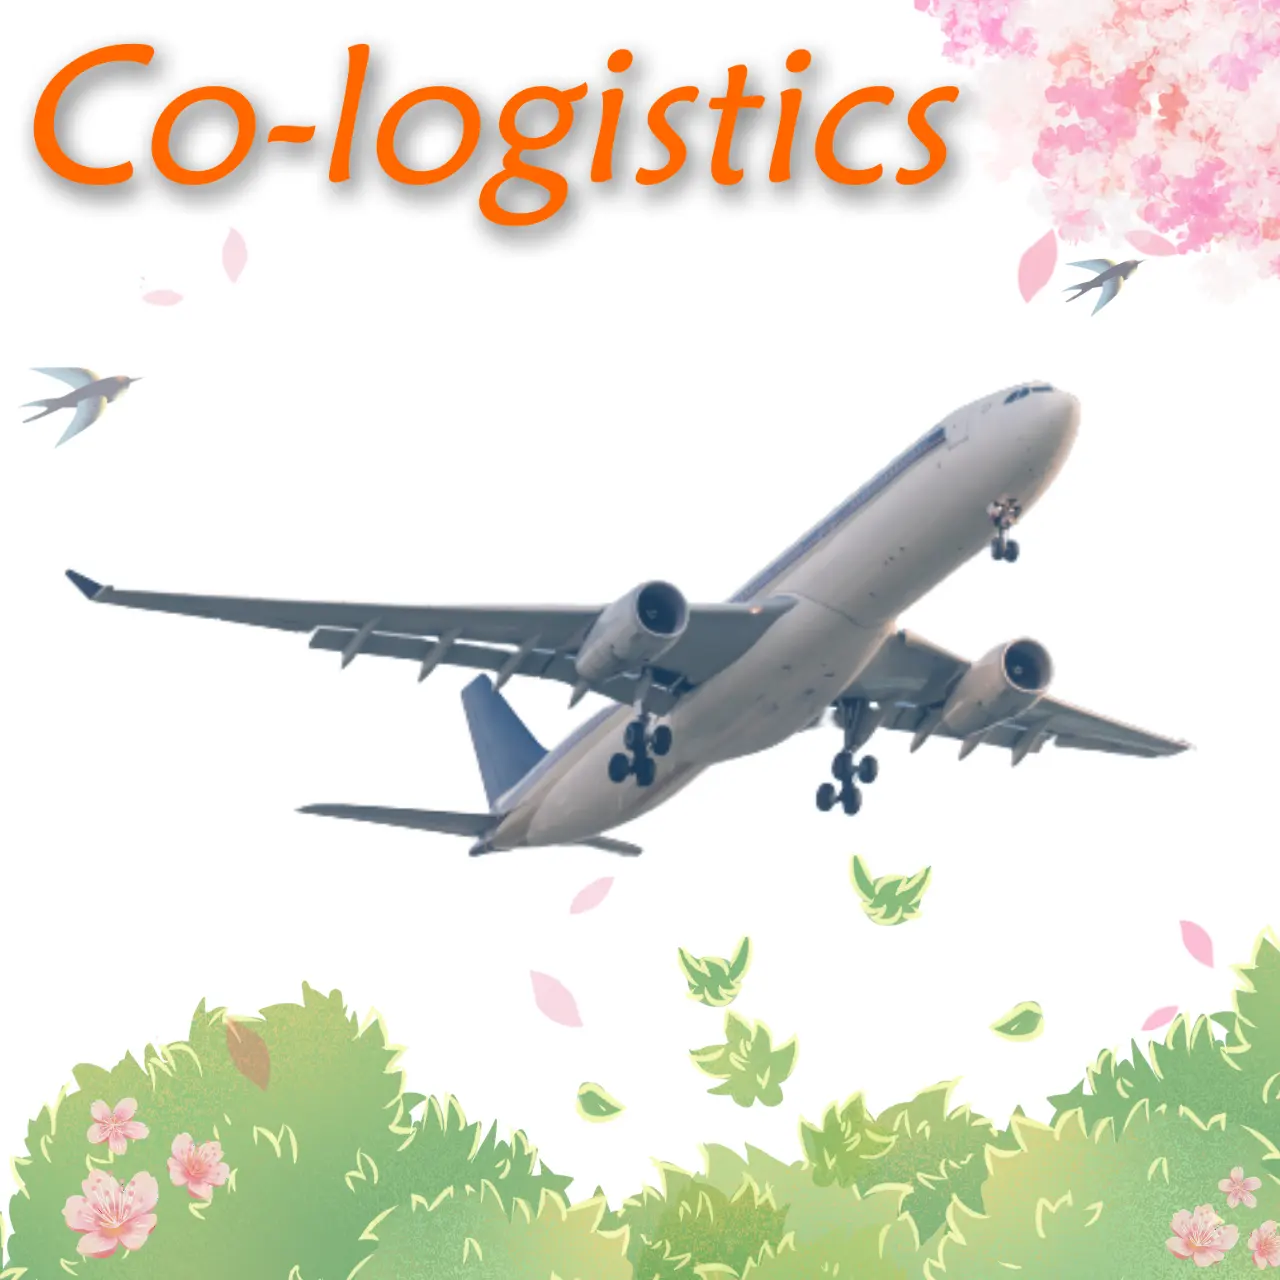 Drop shipping agent China shipping agent with warehouse order fulfillment service international logistics company in China